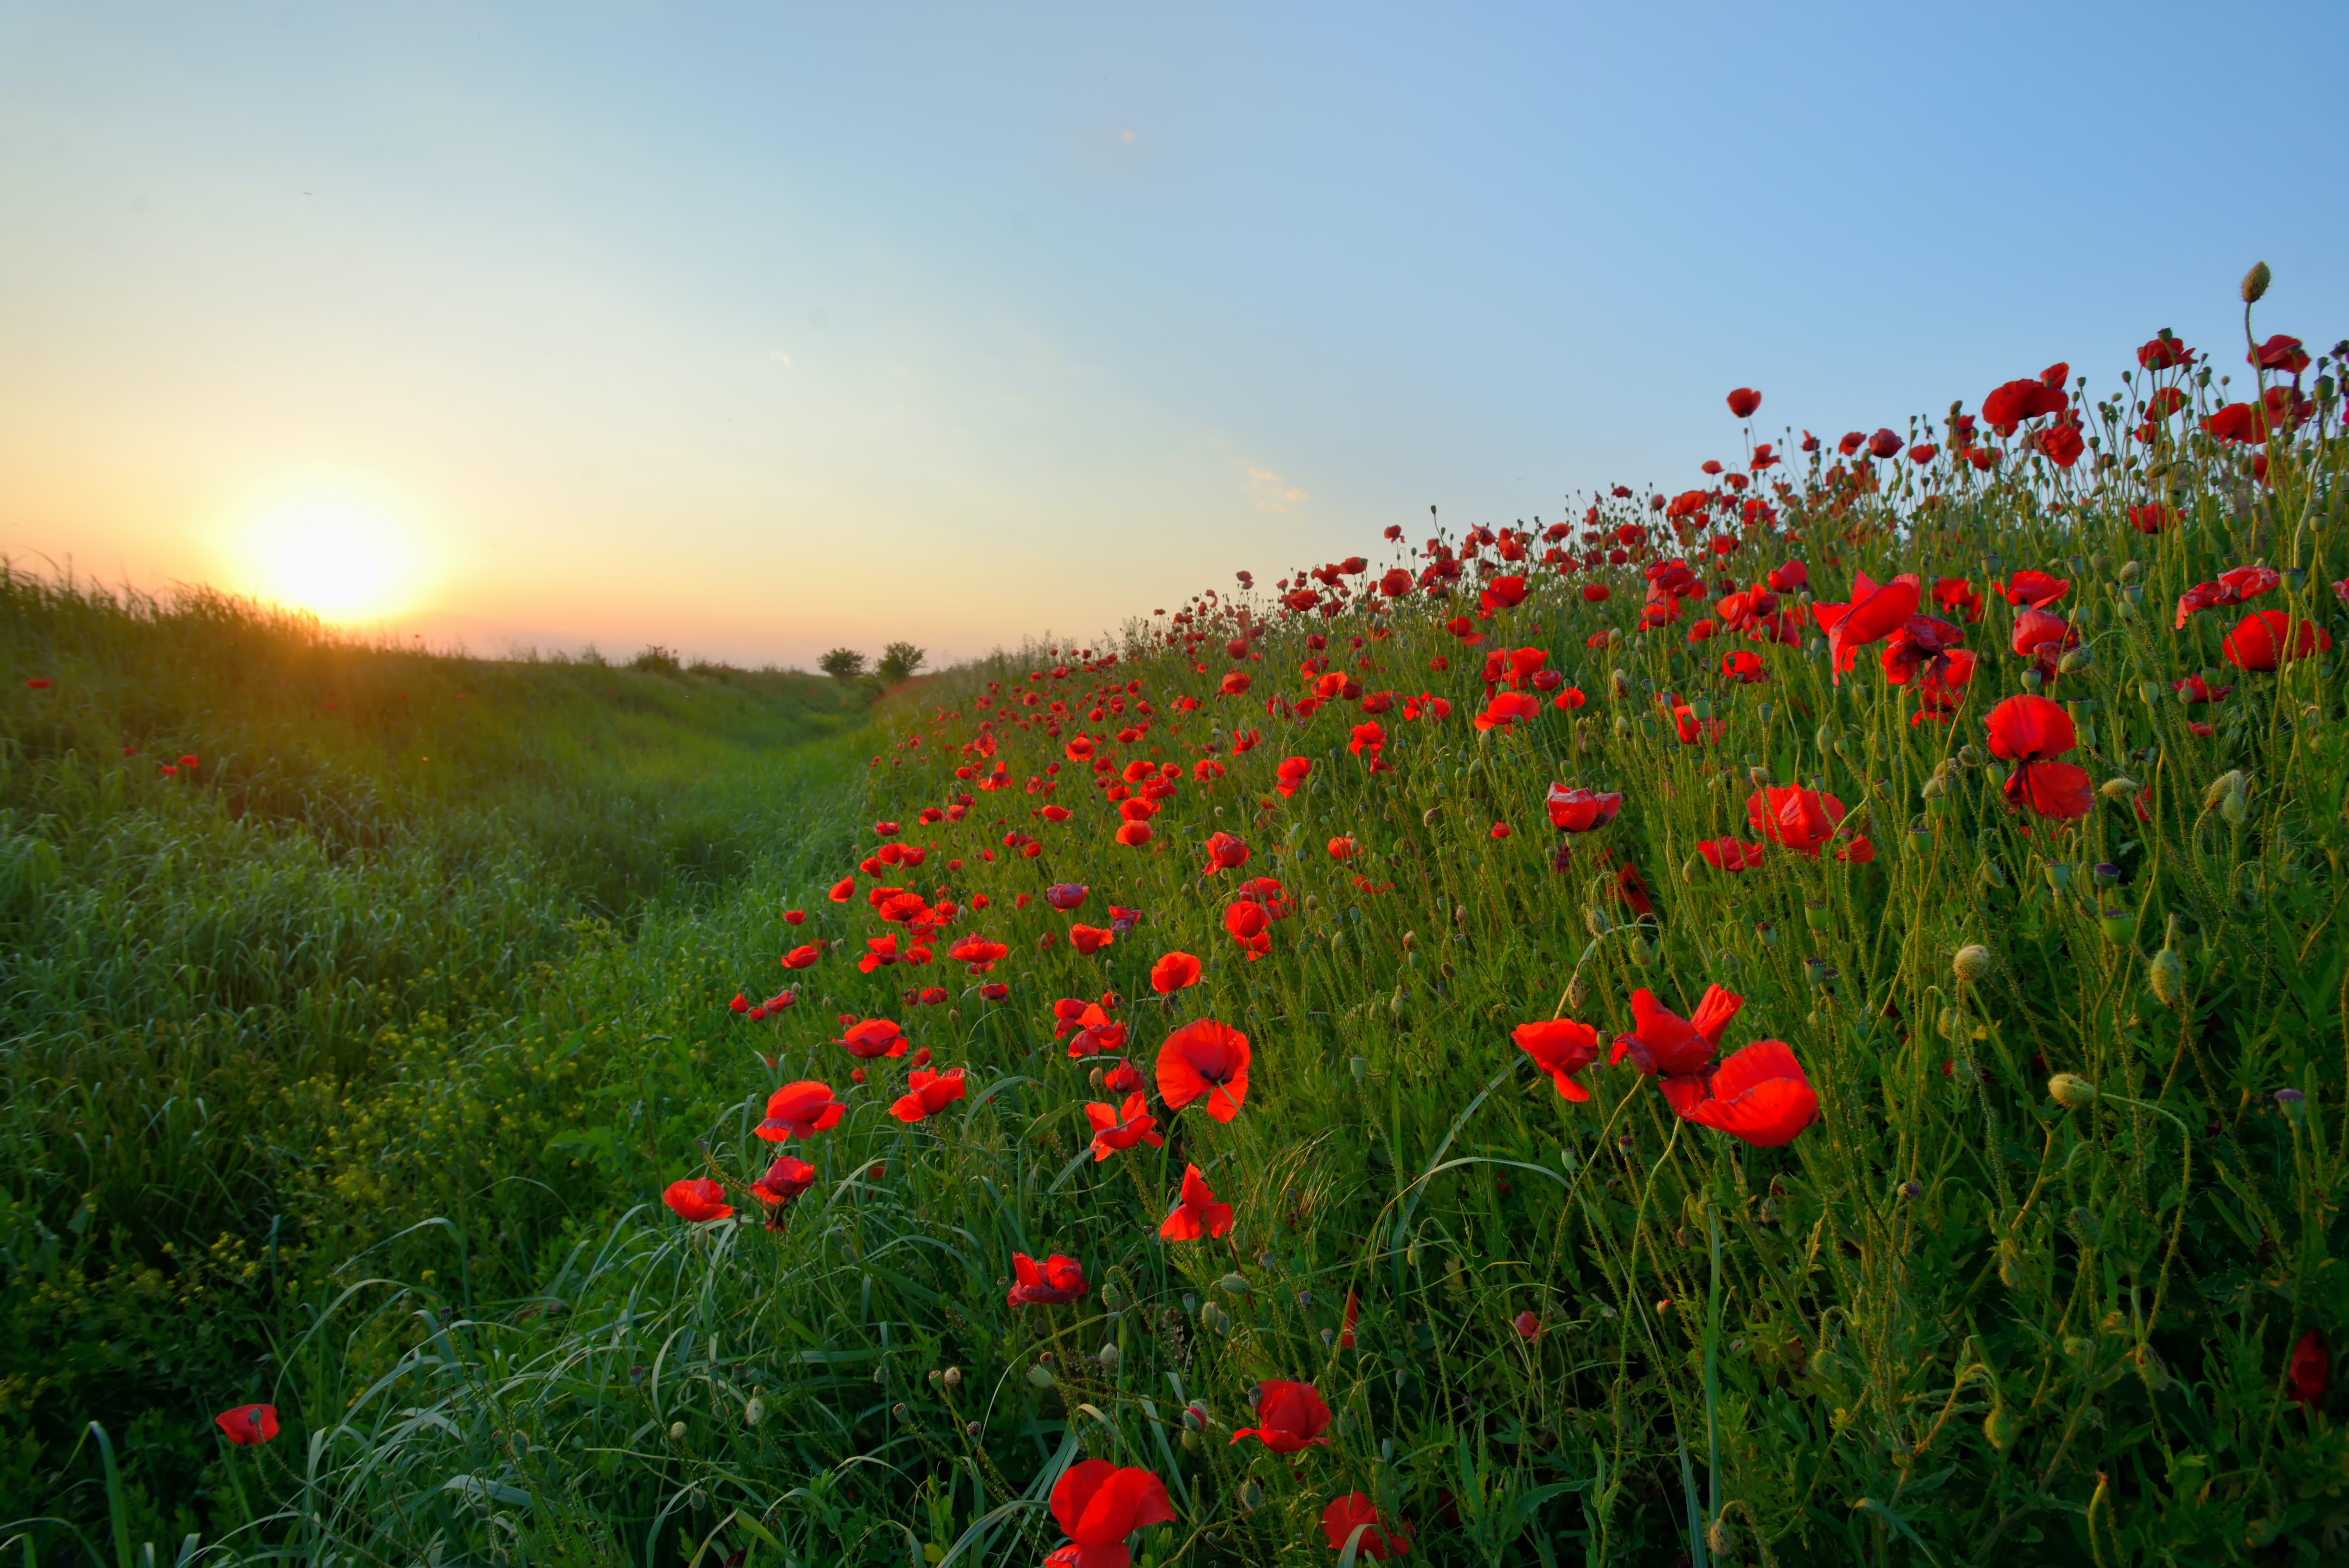 field of poppies during sunset - feature image for memorial day sales